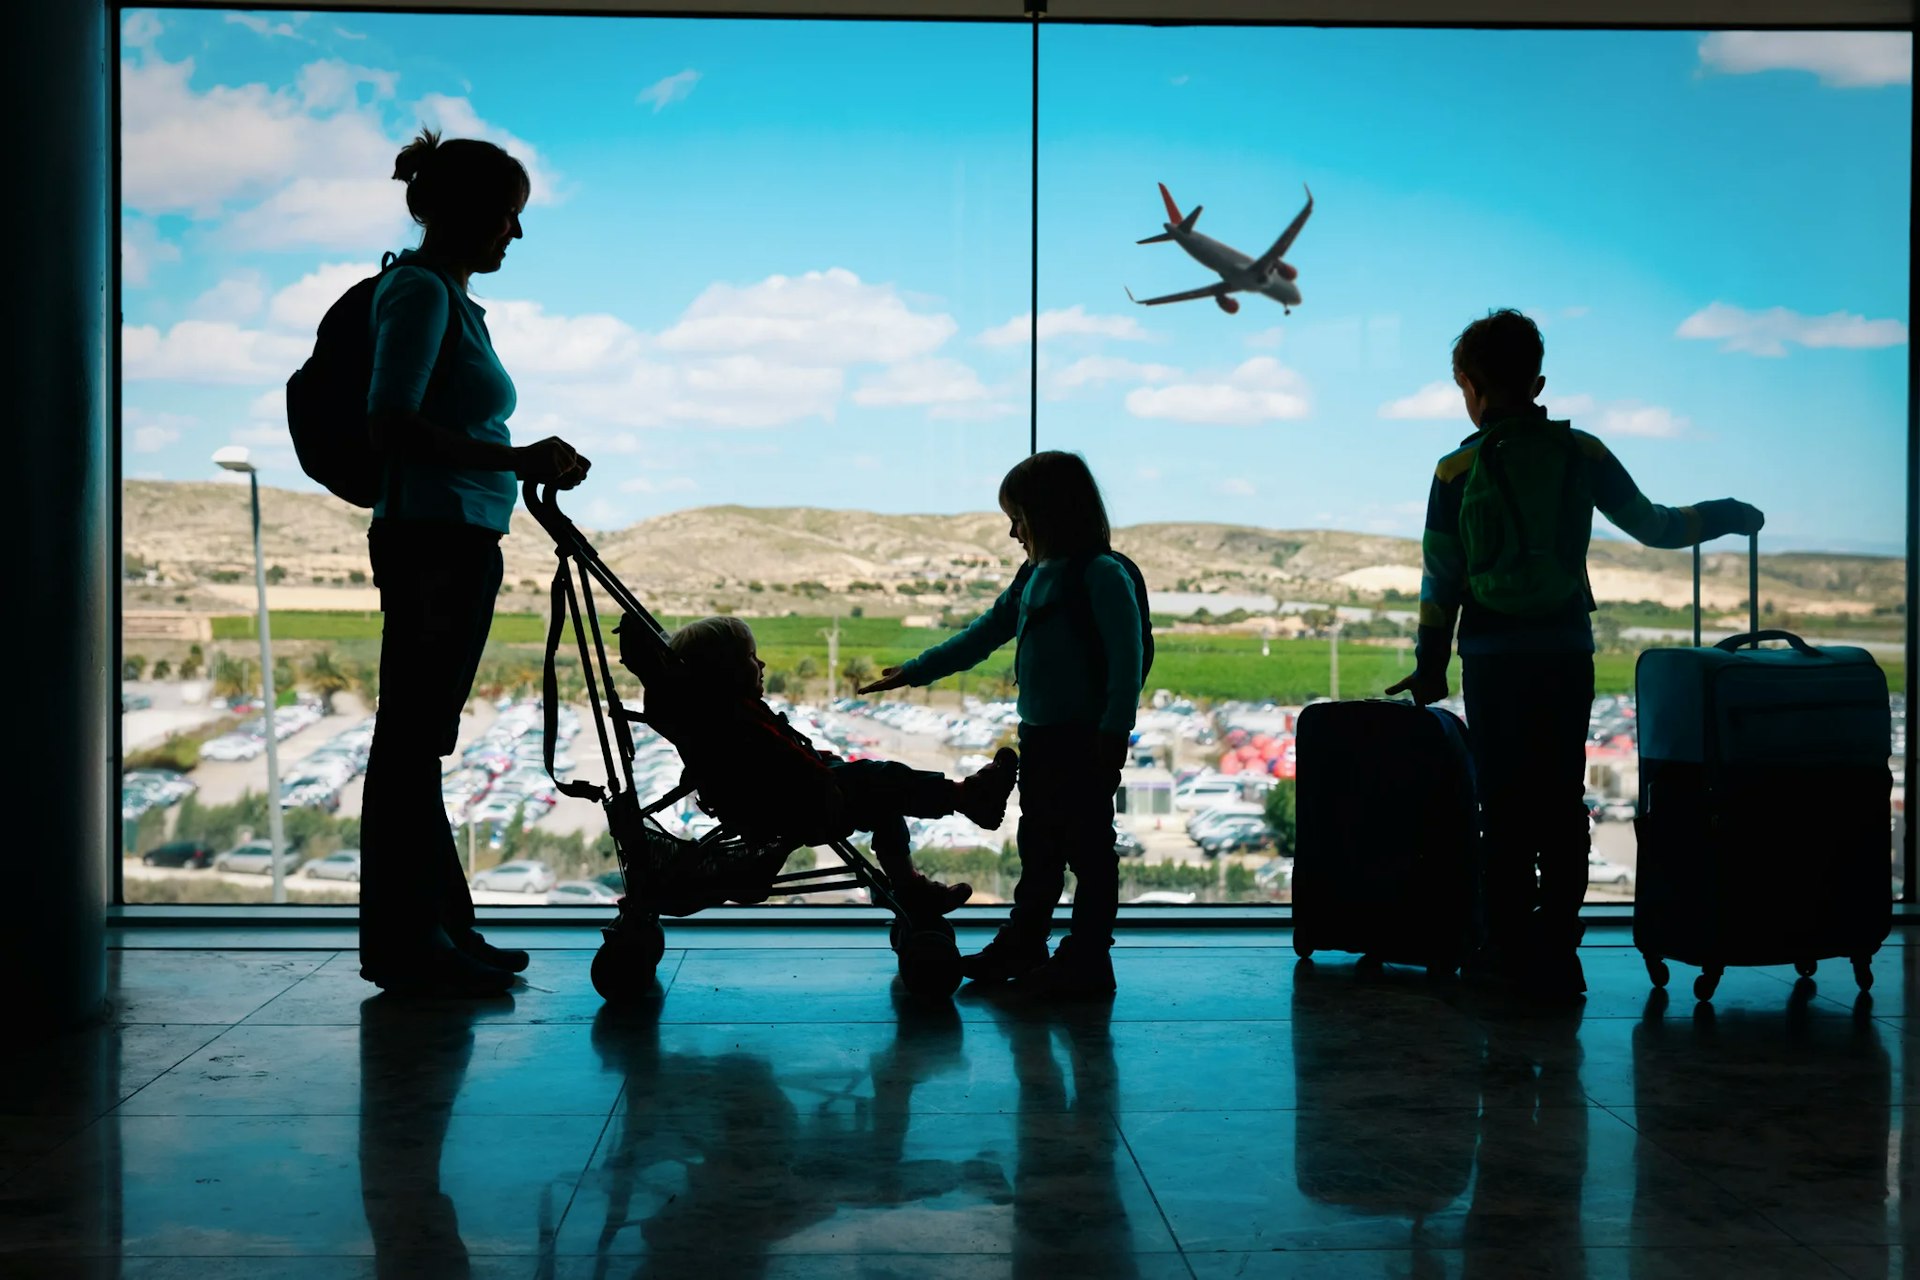 Silhouettes of a woman with a pram, a baby and two children with luggage at an airport 